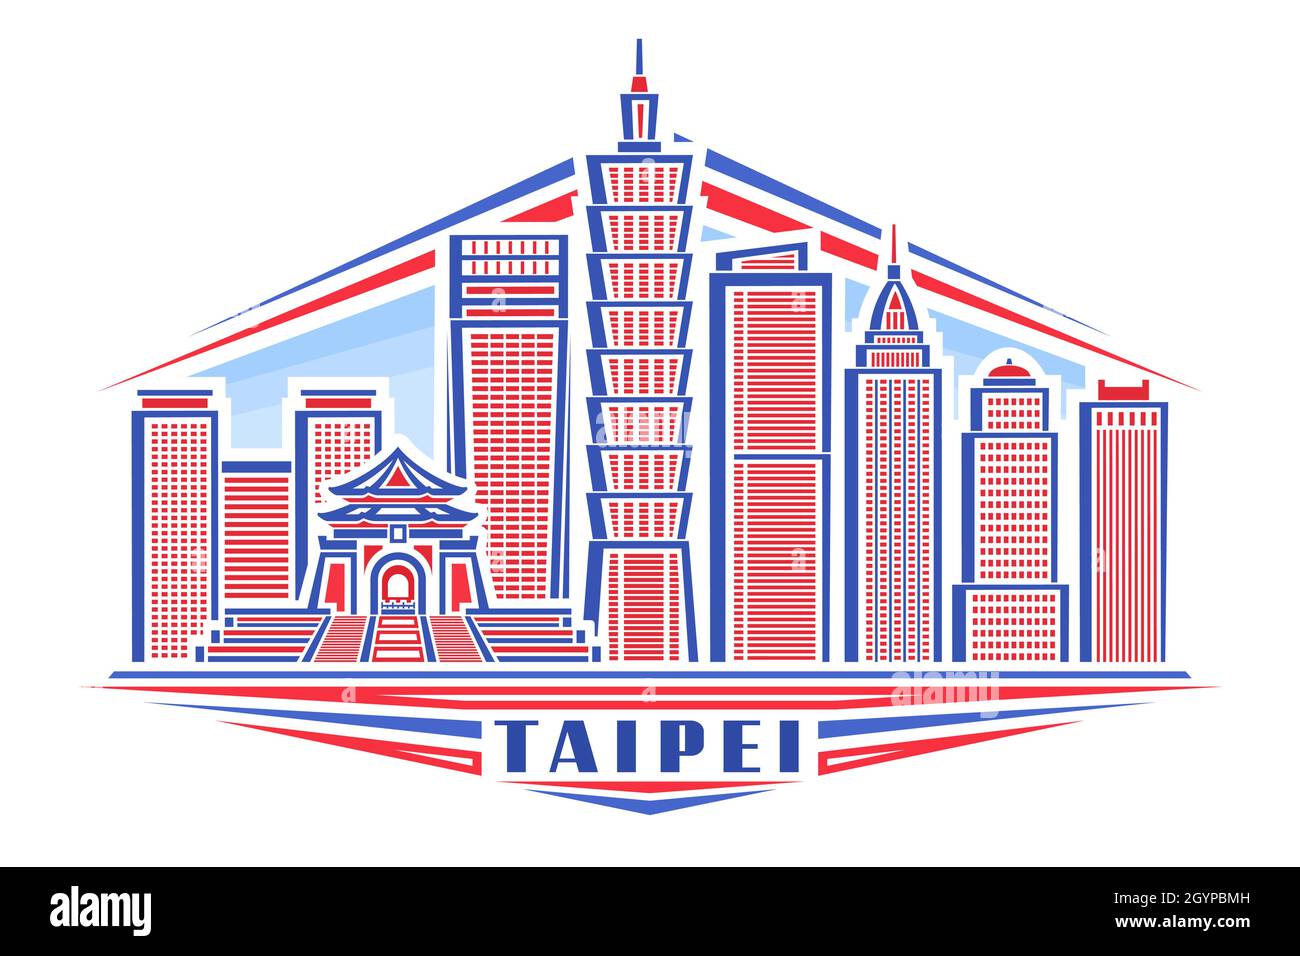 Vector illustration of Taipei, horizontal poster with linear design taipei city scape on day sky background, outline urban line art concept with decor Stock Vector